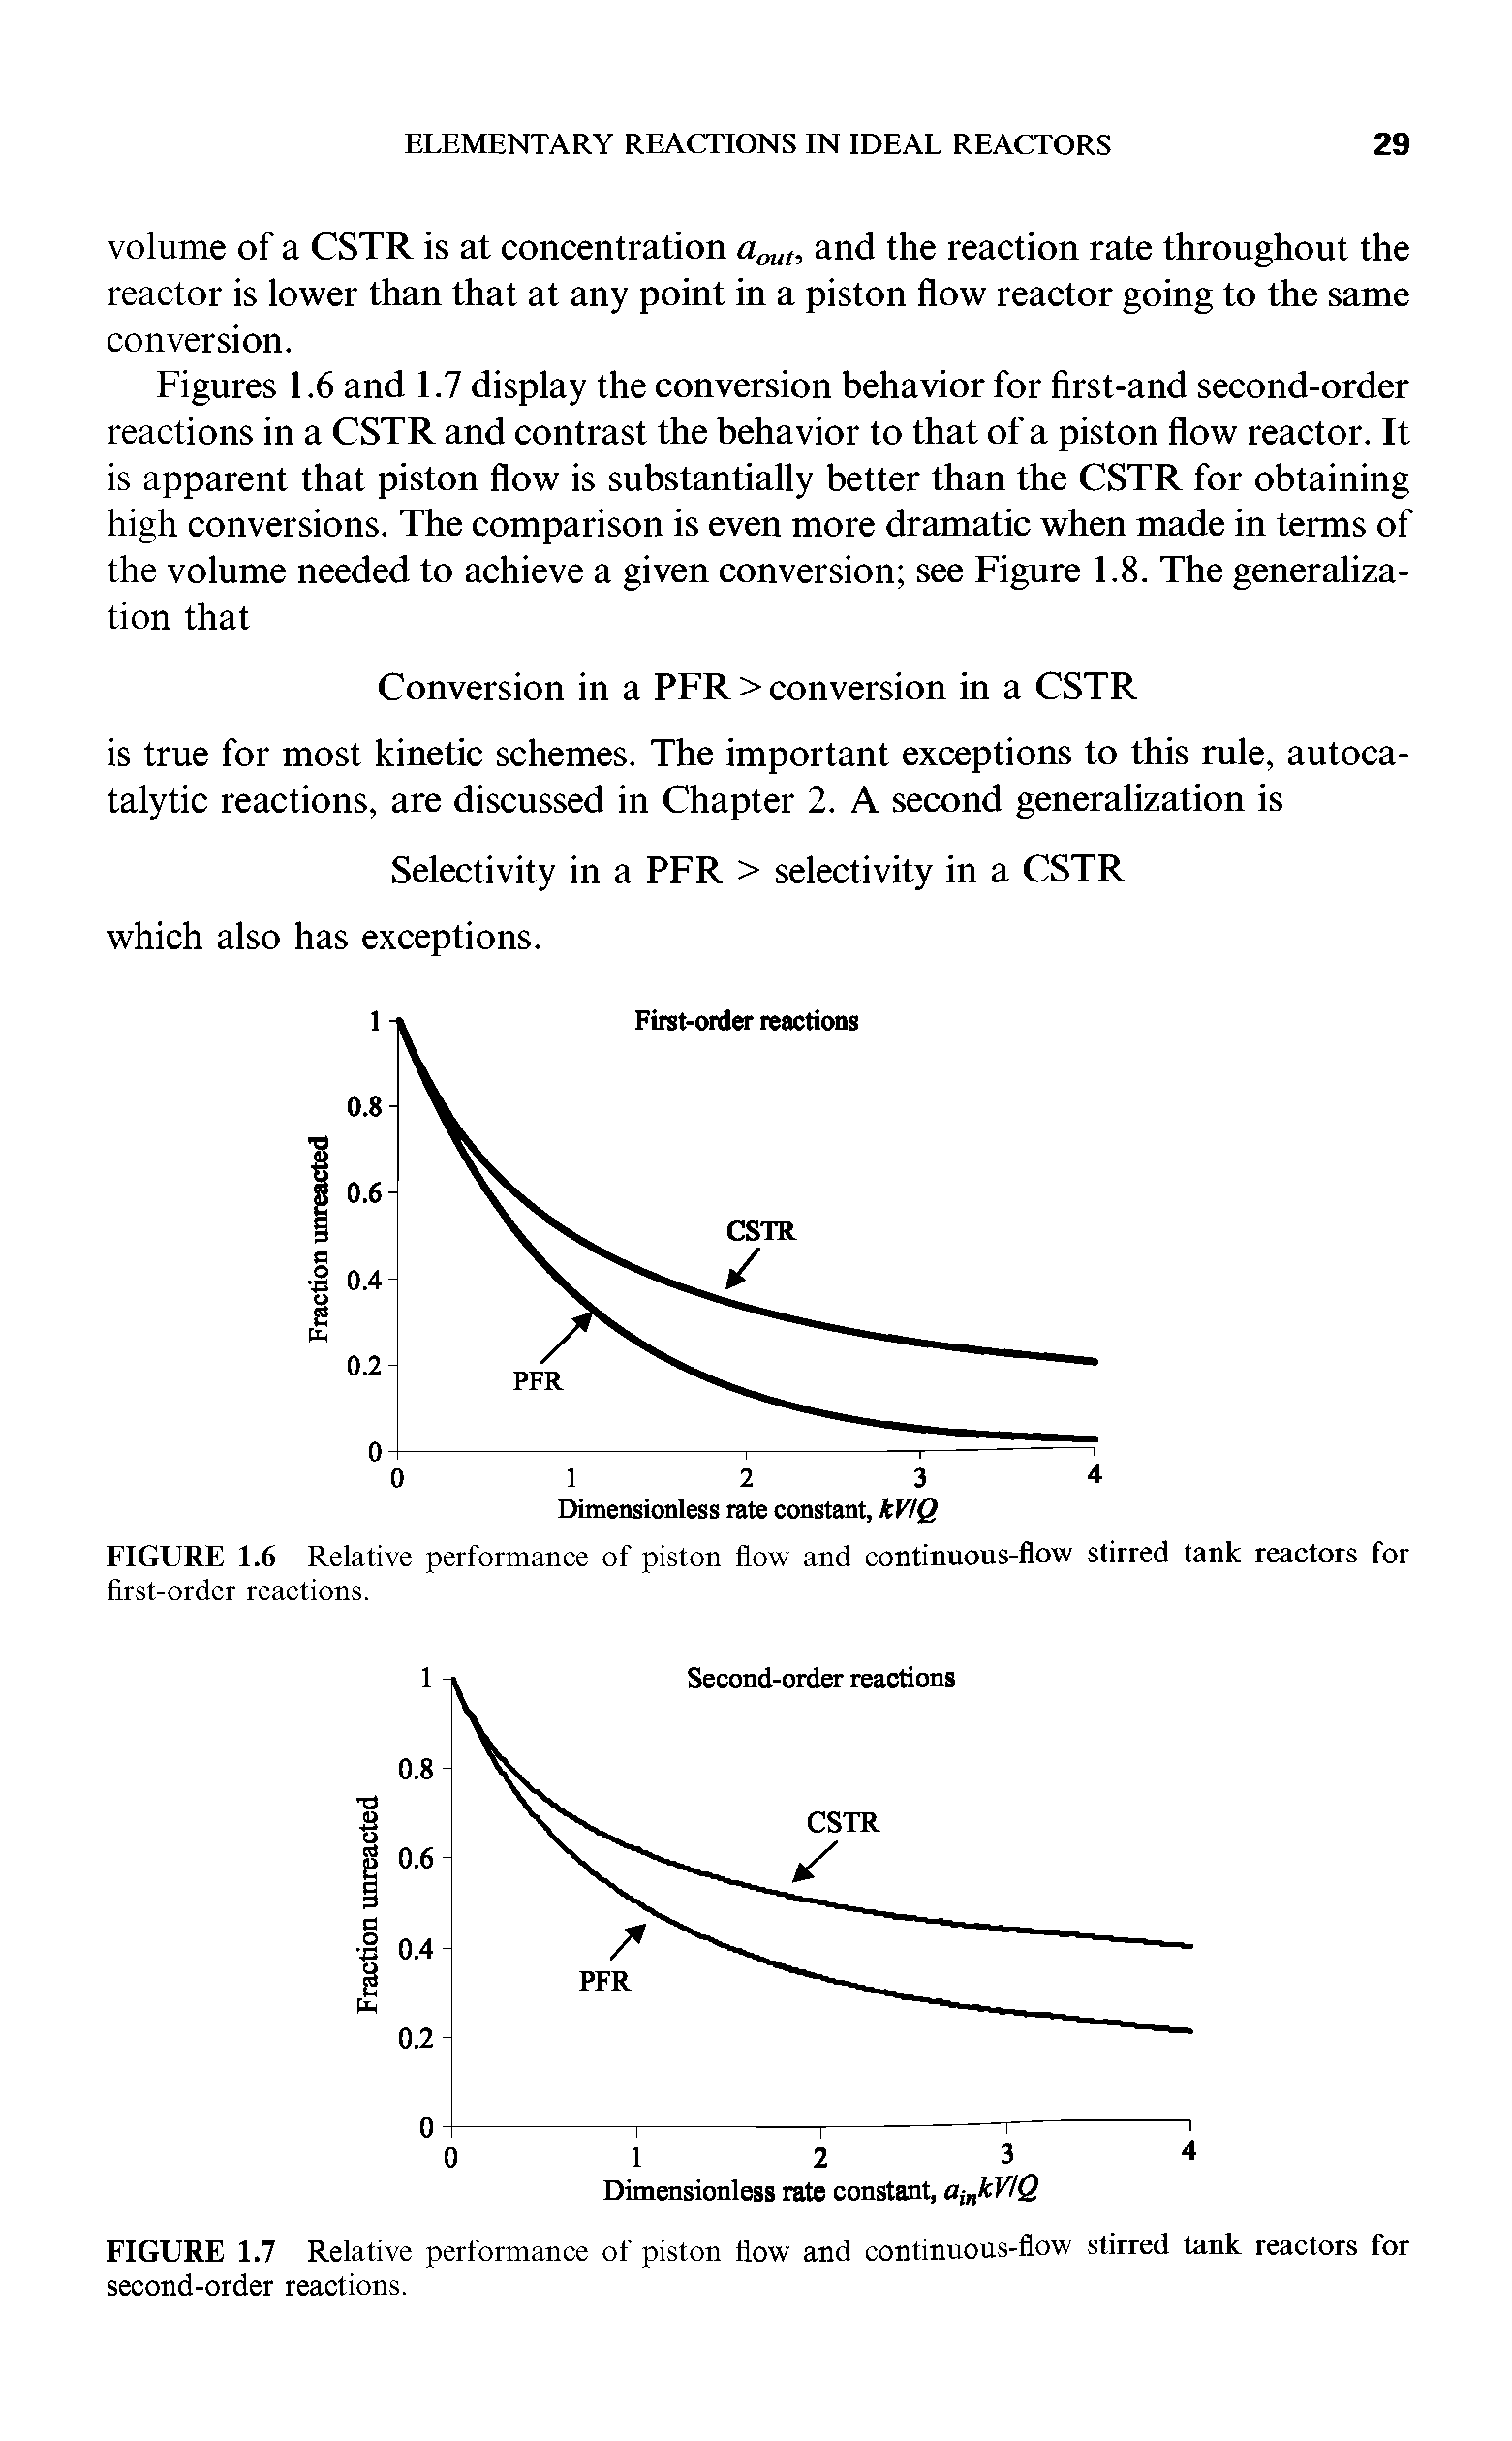 Figures 1.6 and 1.7 display the conversion behavior for flrst-and second-order reactions in a CSTR and contrast the behavior to that of a piston flow reactor. It is apparent that piston flow is substantially better than the CSTR for obtaining high conversions. The comparison is even more dramatic when made in terms of the volume needed to achieve a given conversion see Figure 1.8. The generalization that...